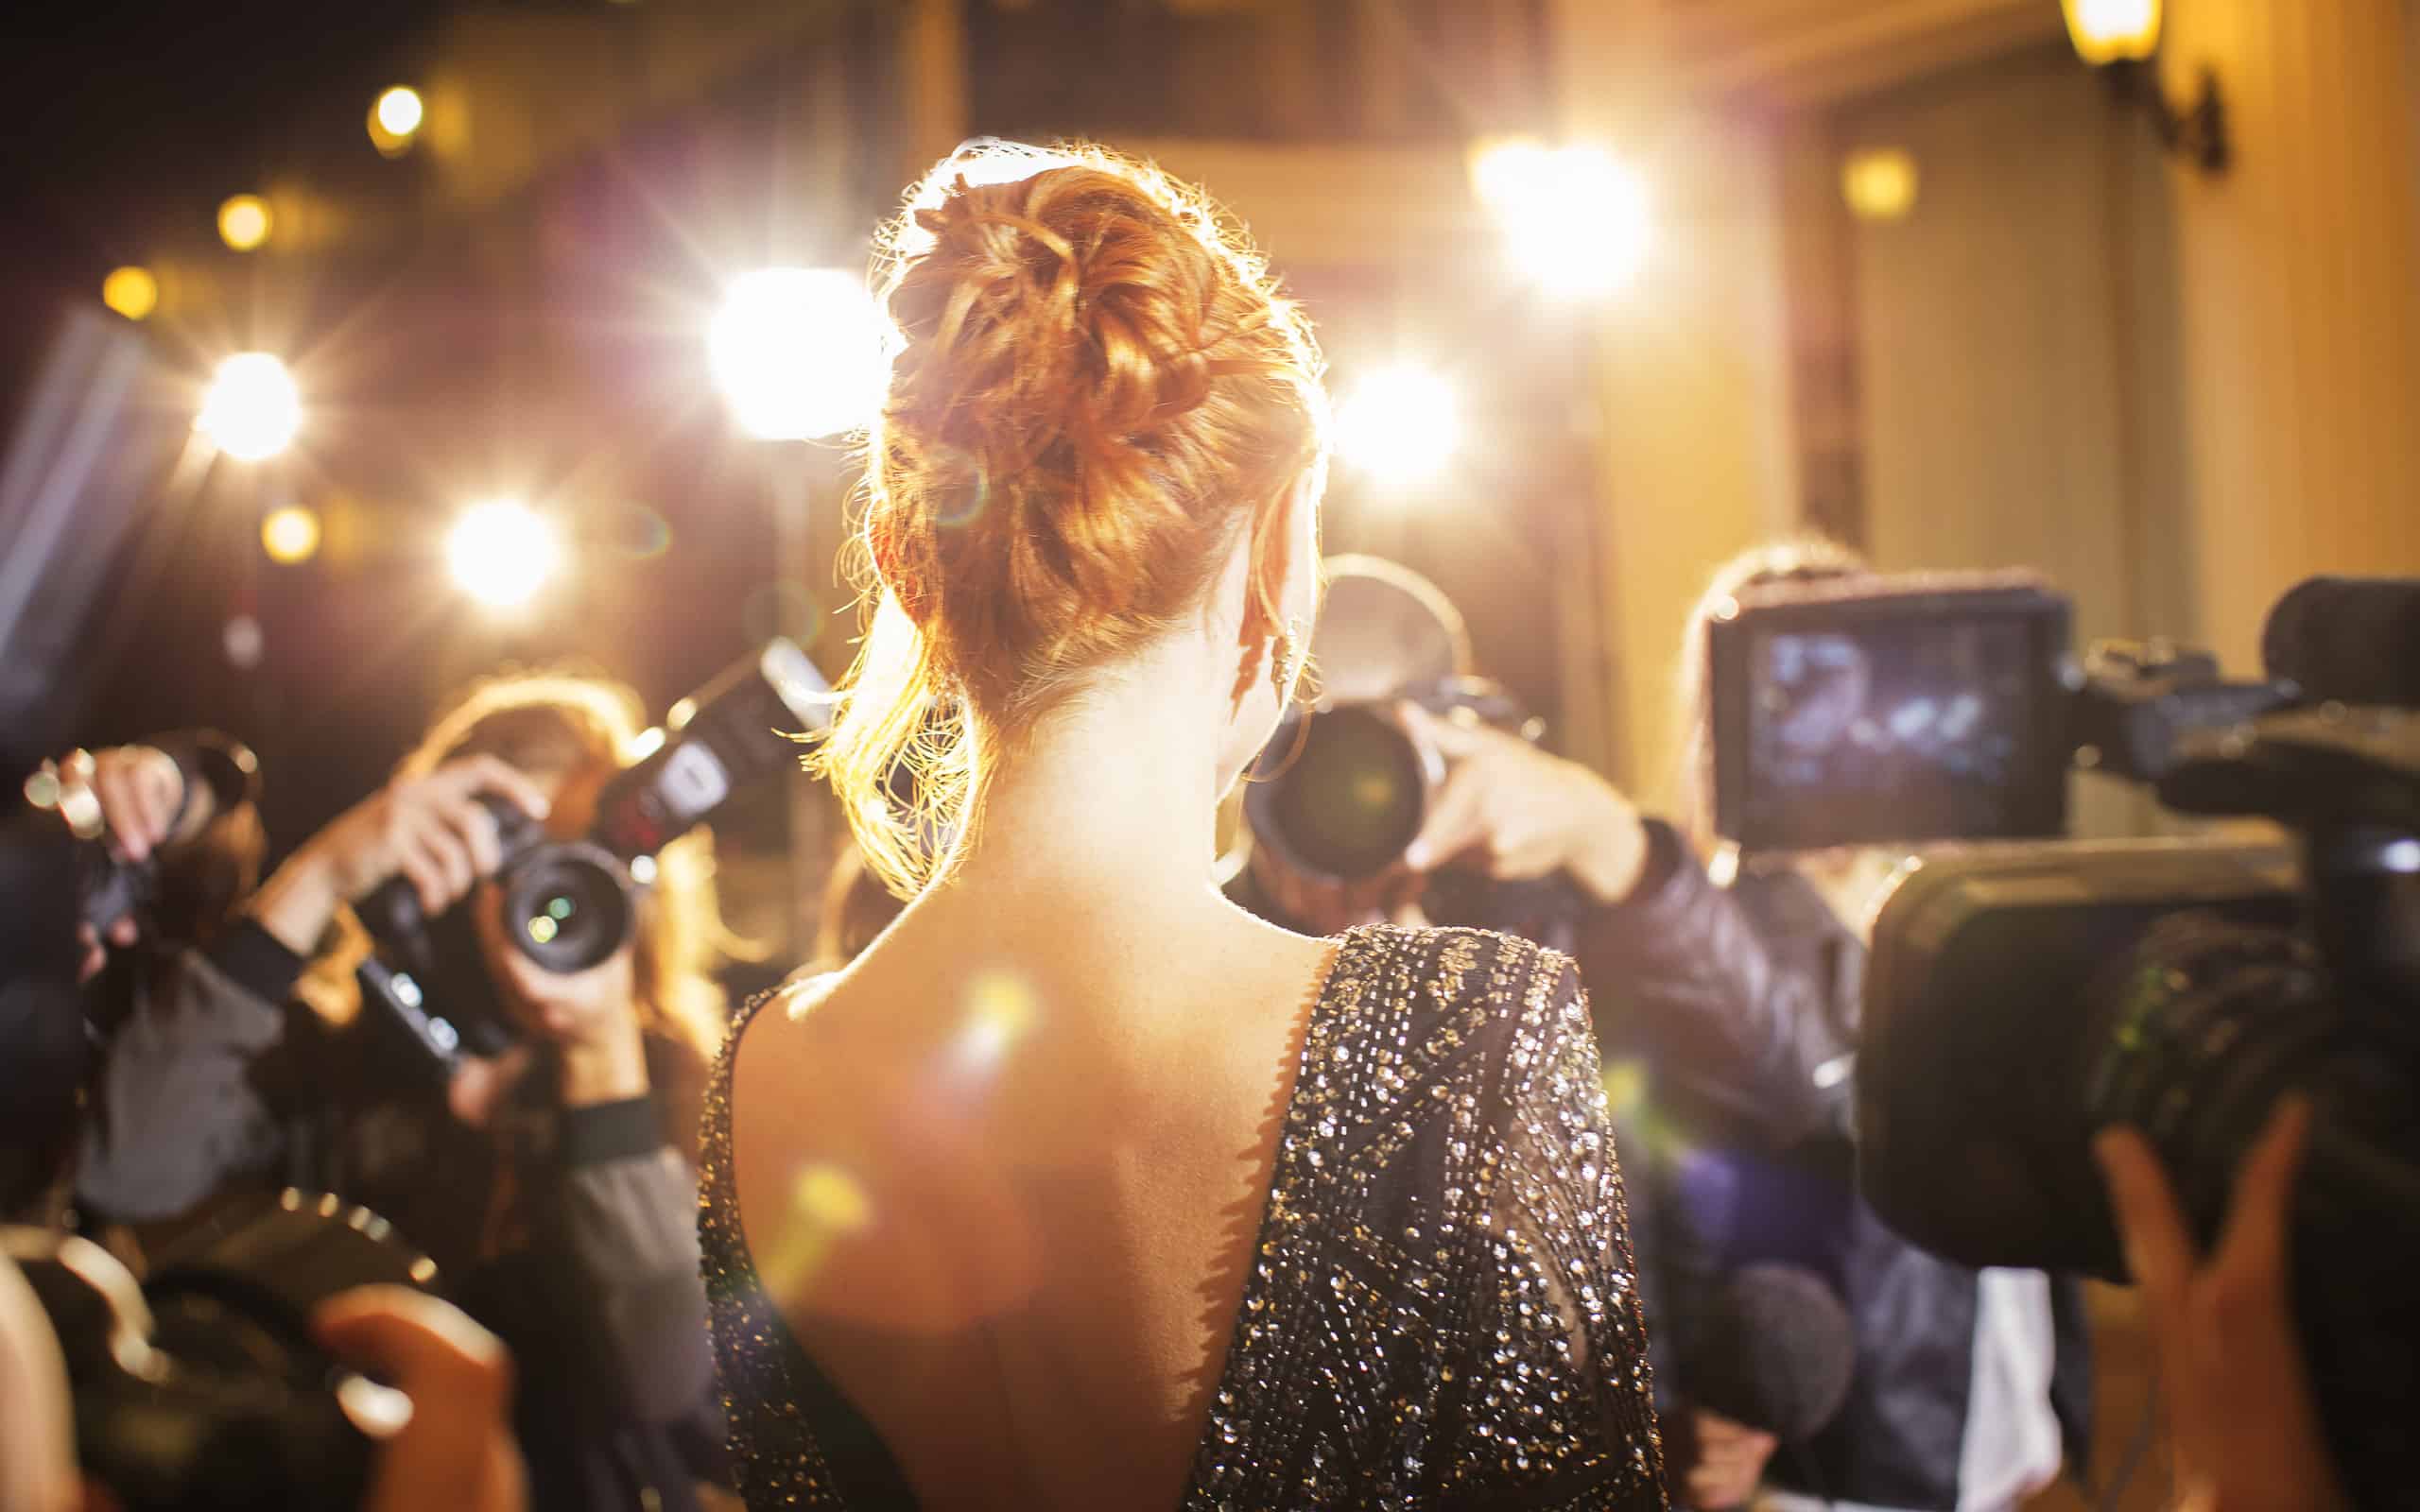 Celebrity being photographed by paparazzi photographers at event